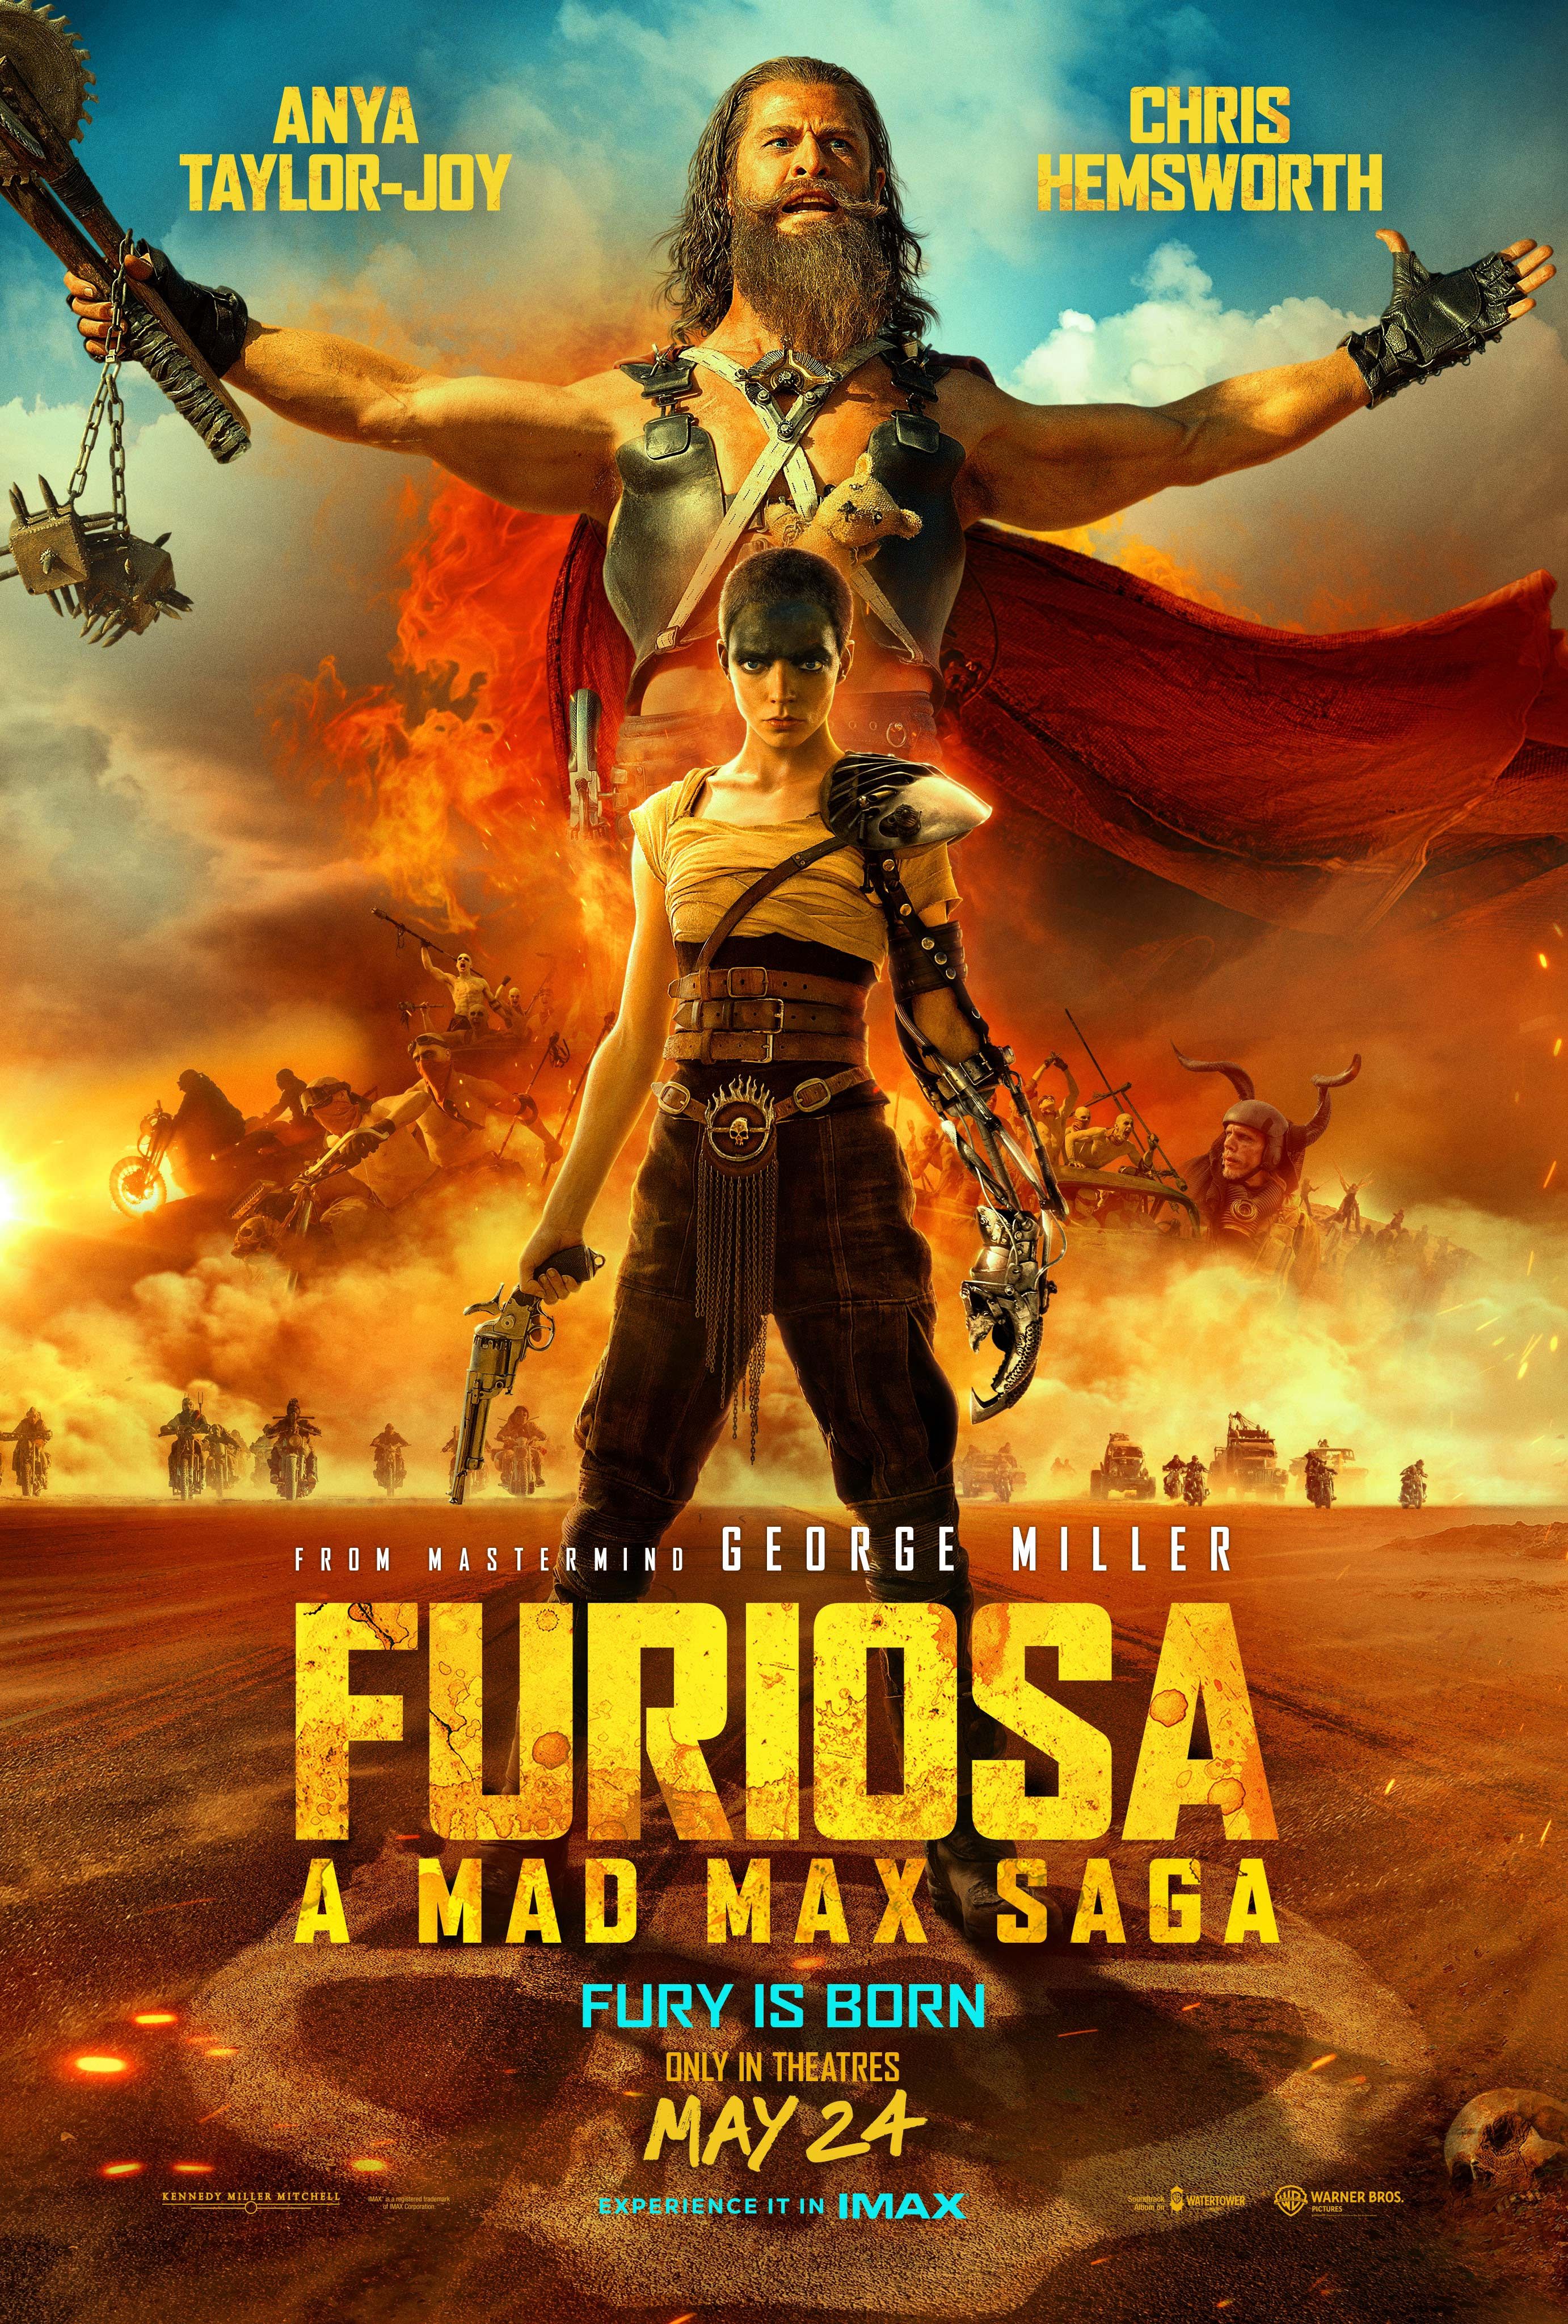 George Miller Confirms Max Cameo In Mad Max: Furiosa Movie (& Teases When To Look For It)